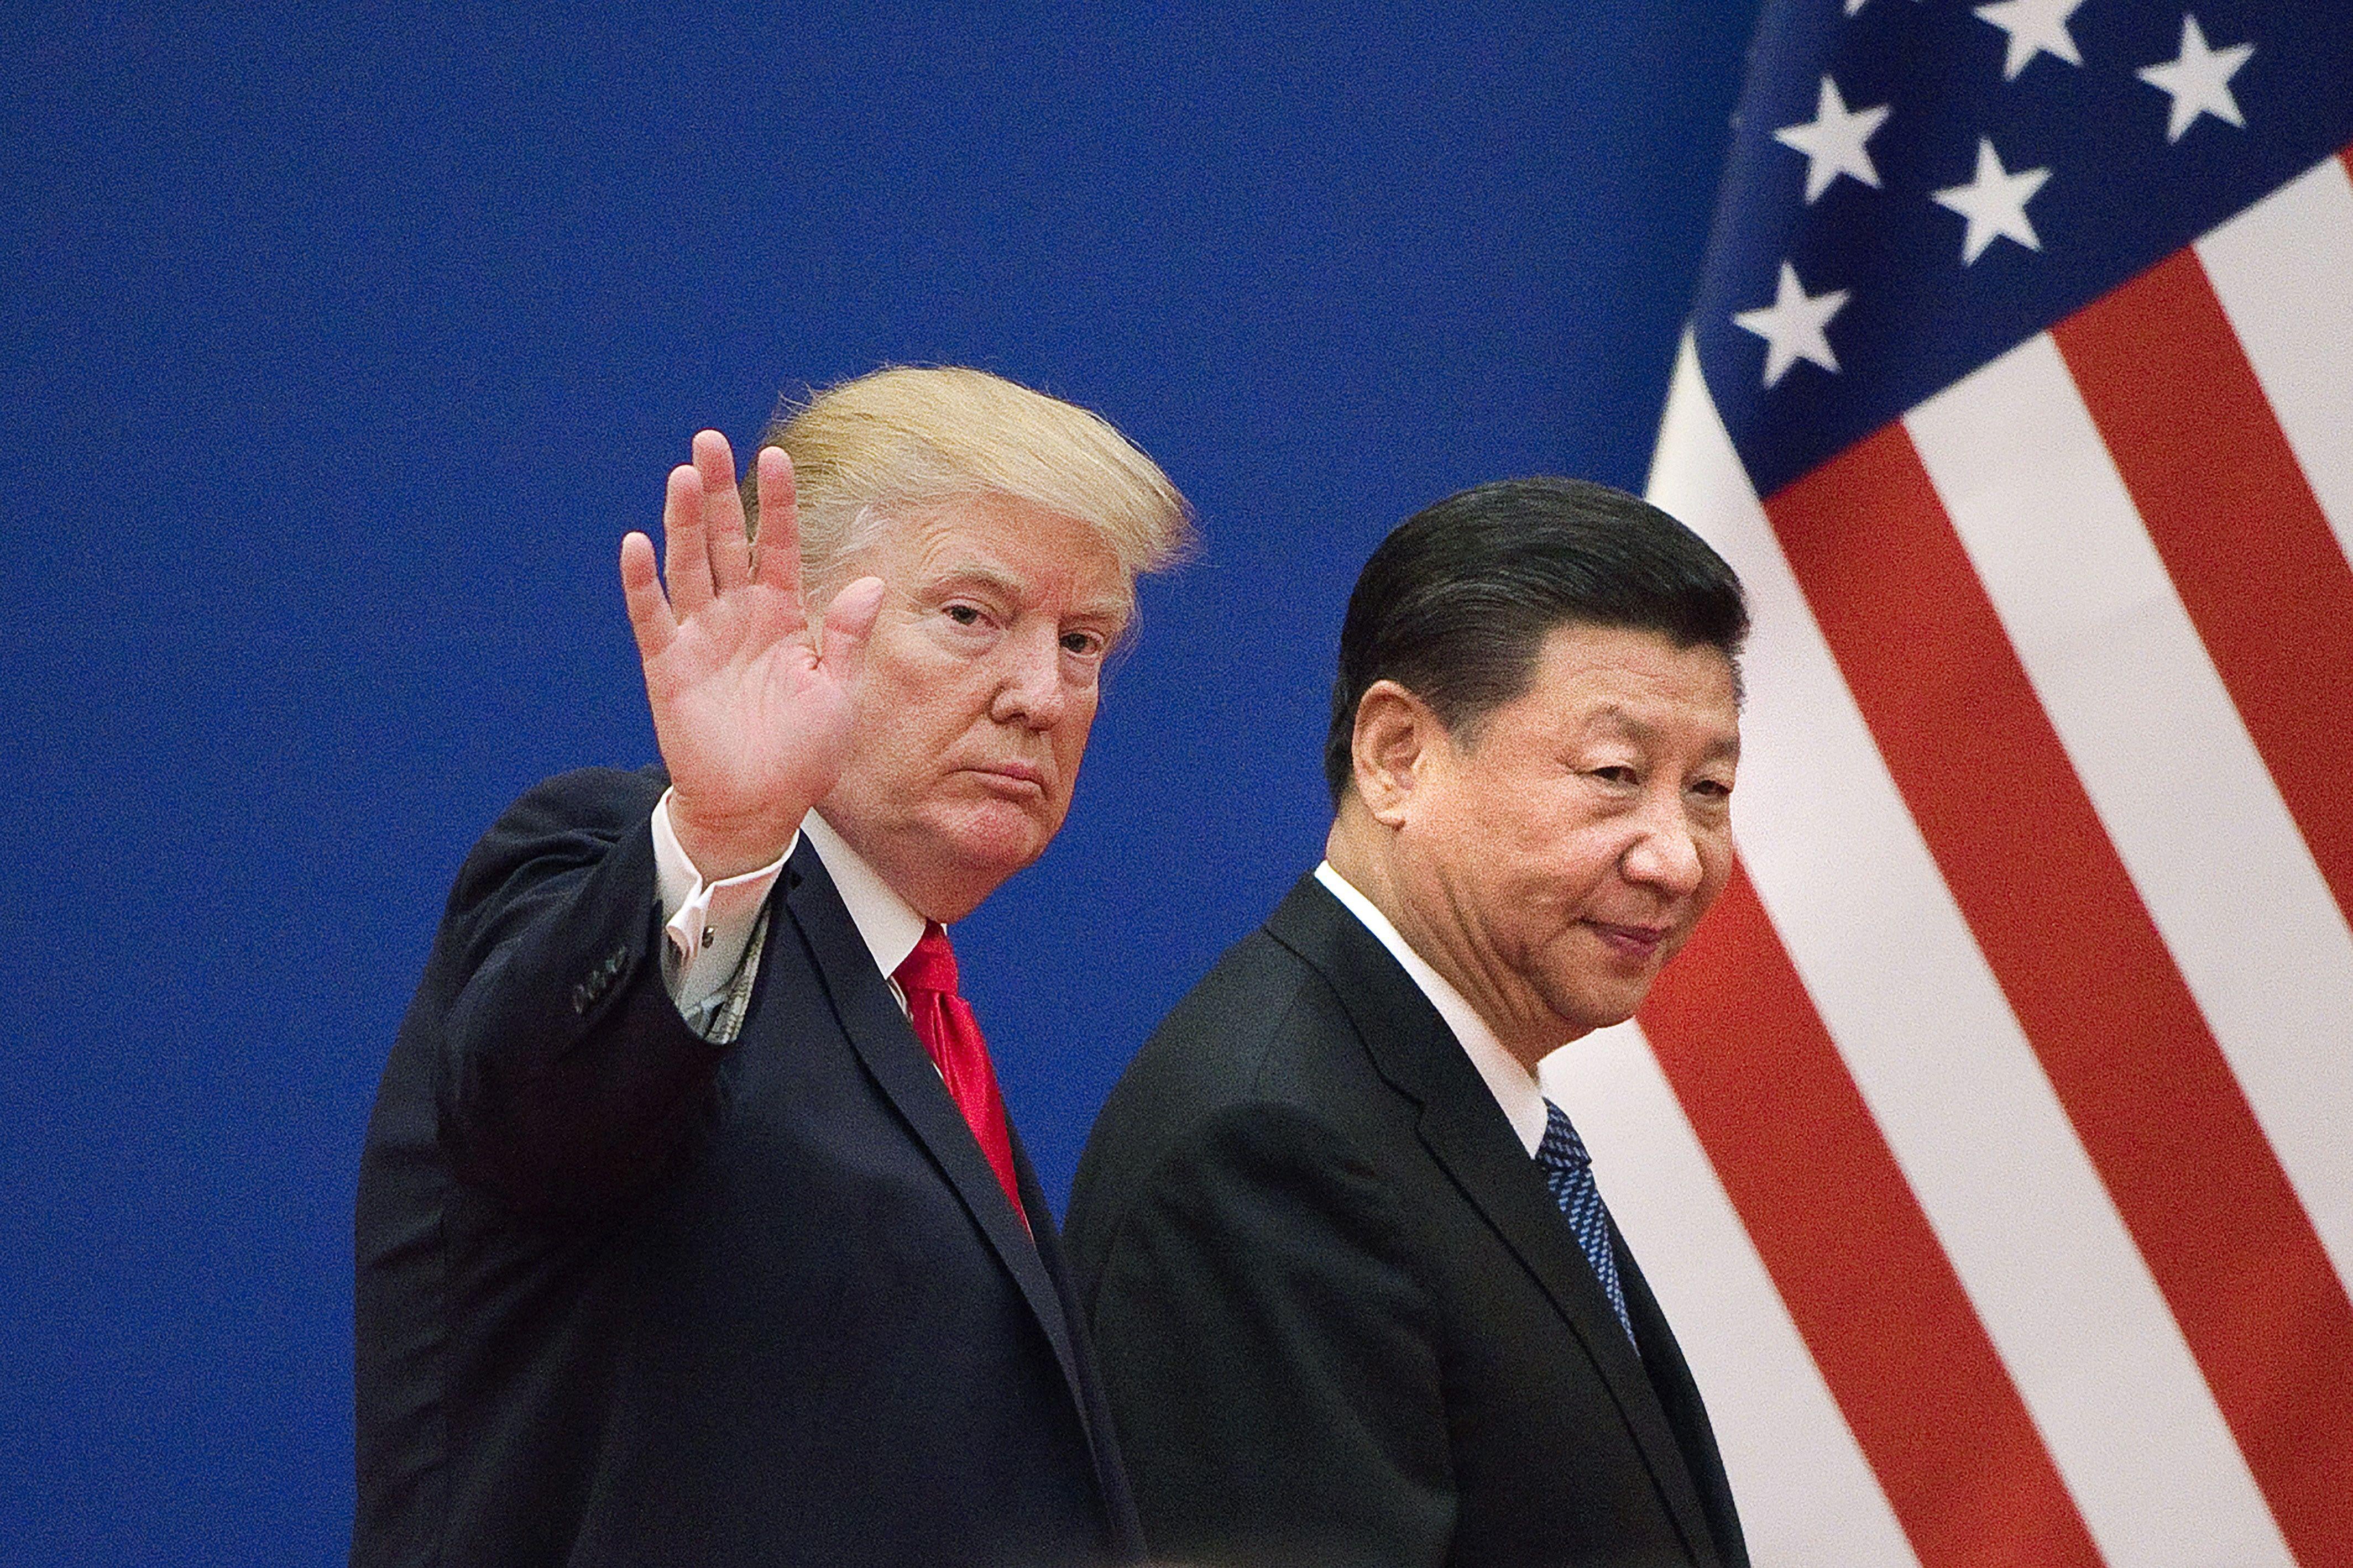 Trump waves as he and Xi walk past an American flag.